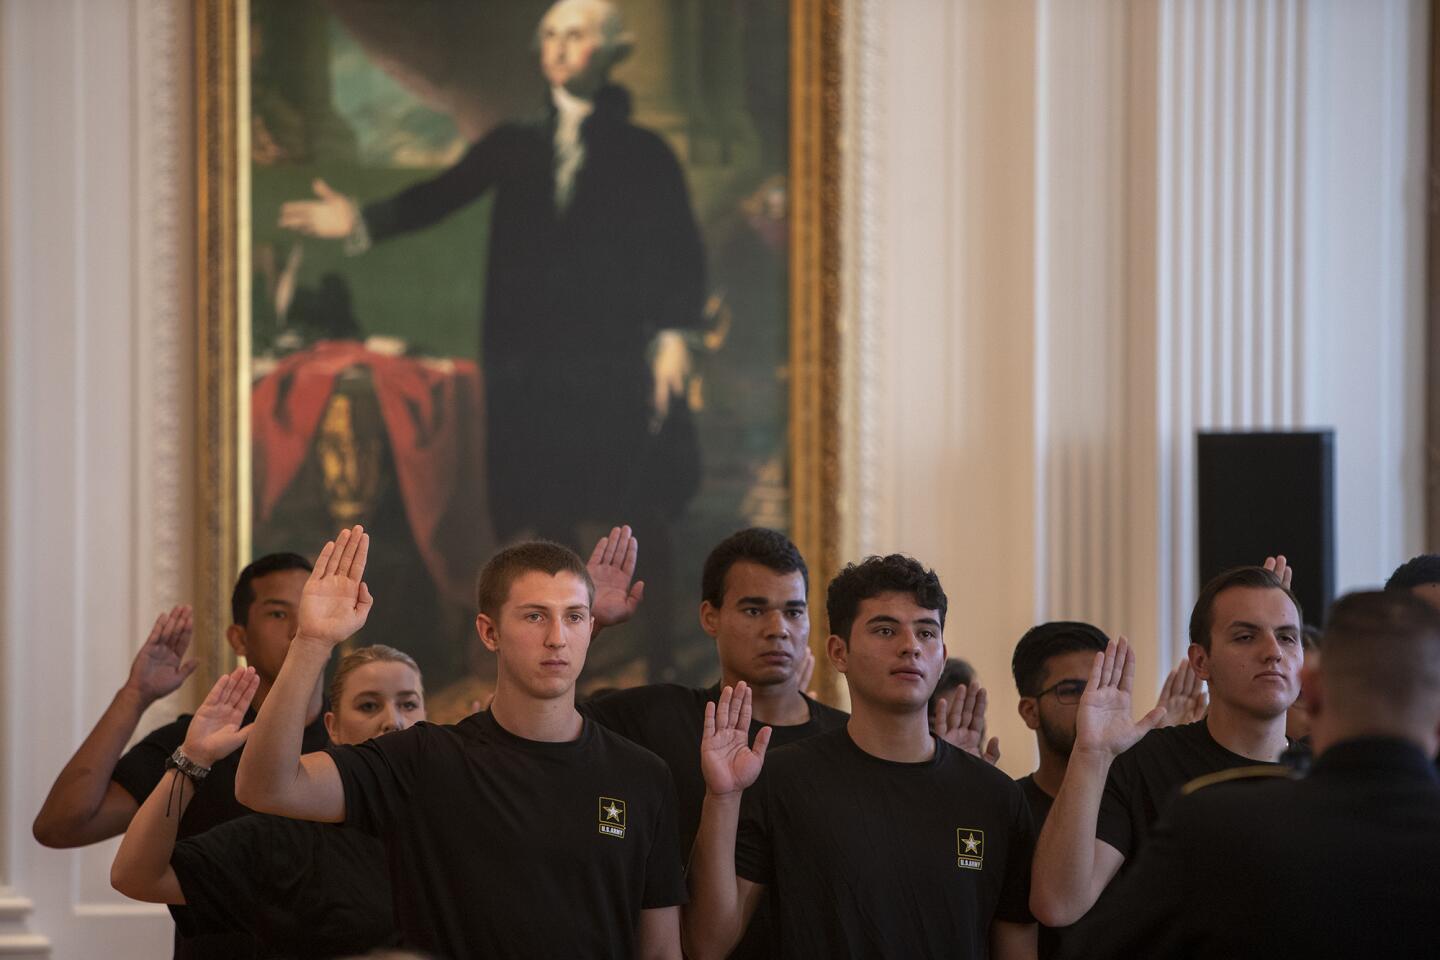 New recruits take the Army Oath of Service during the 9/11 Commemoratrion at the Richard Nixion Presidential Library and Museum on Wednesday, September 11.